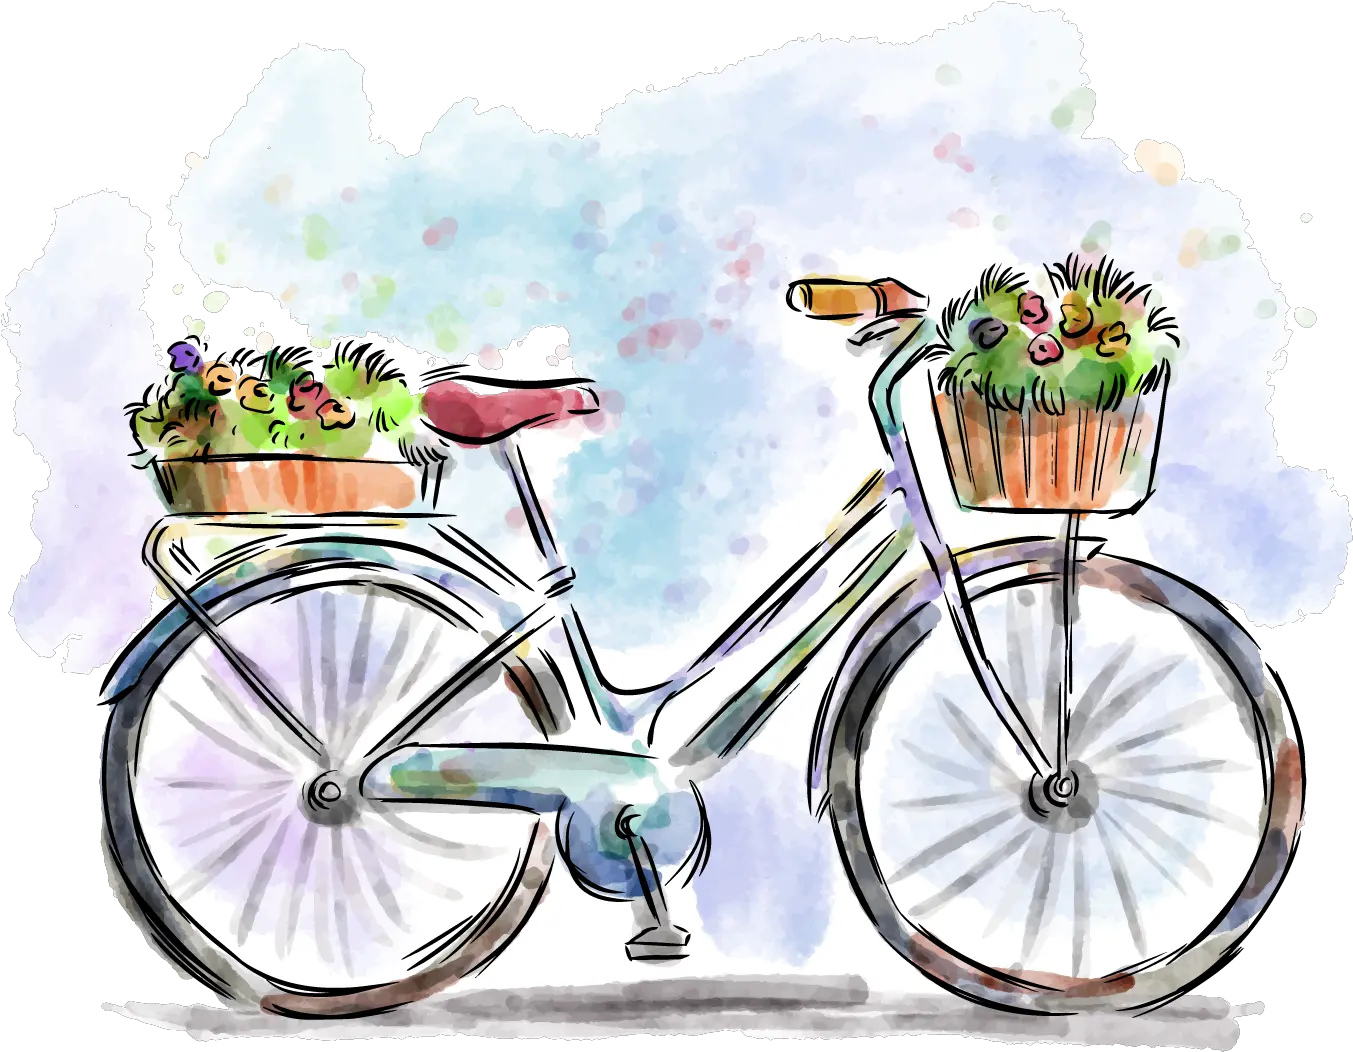 Tire Tracks Vector Png Bicycle Clipart Basket Vector Bike Watercolor Painting Tire Tracks Png